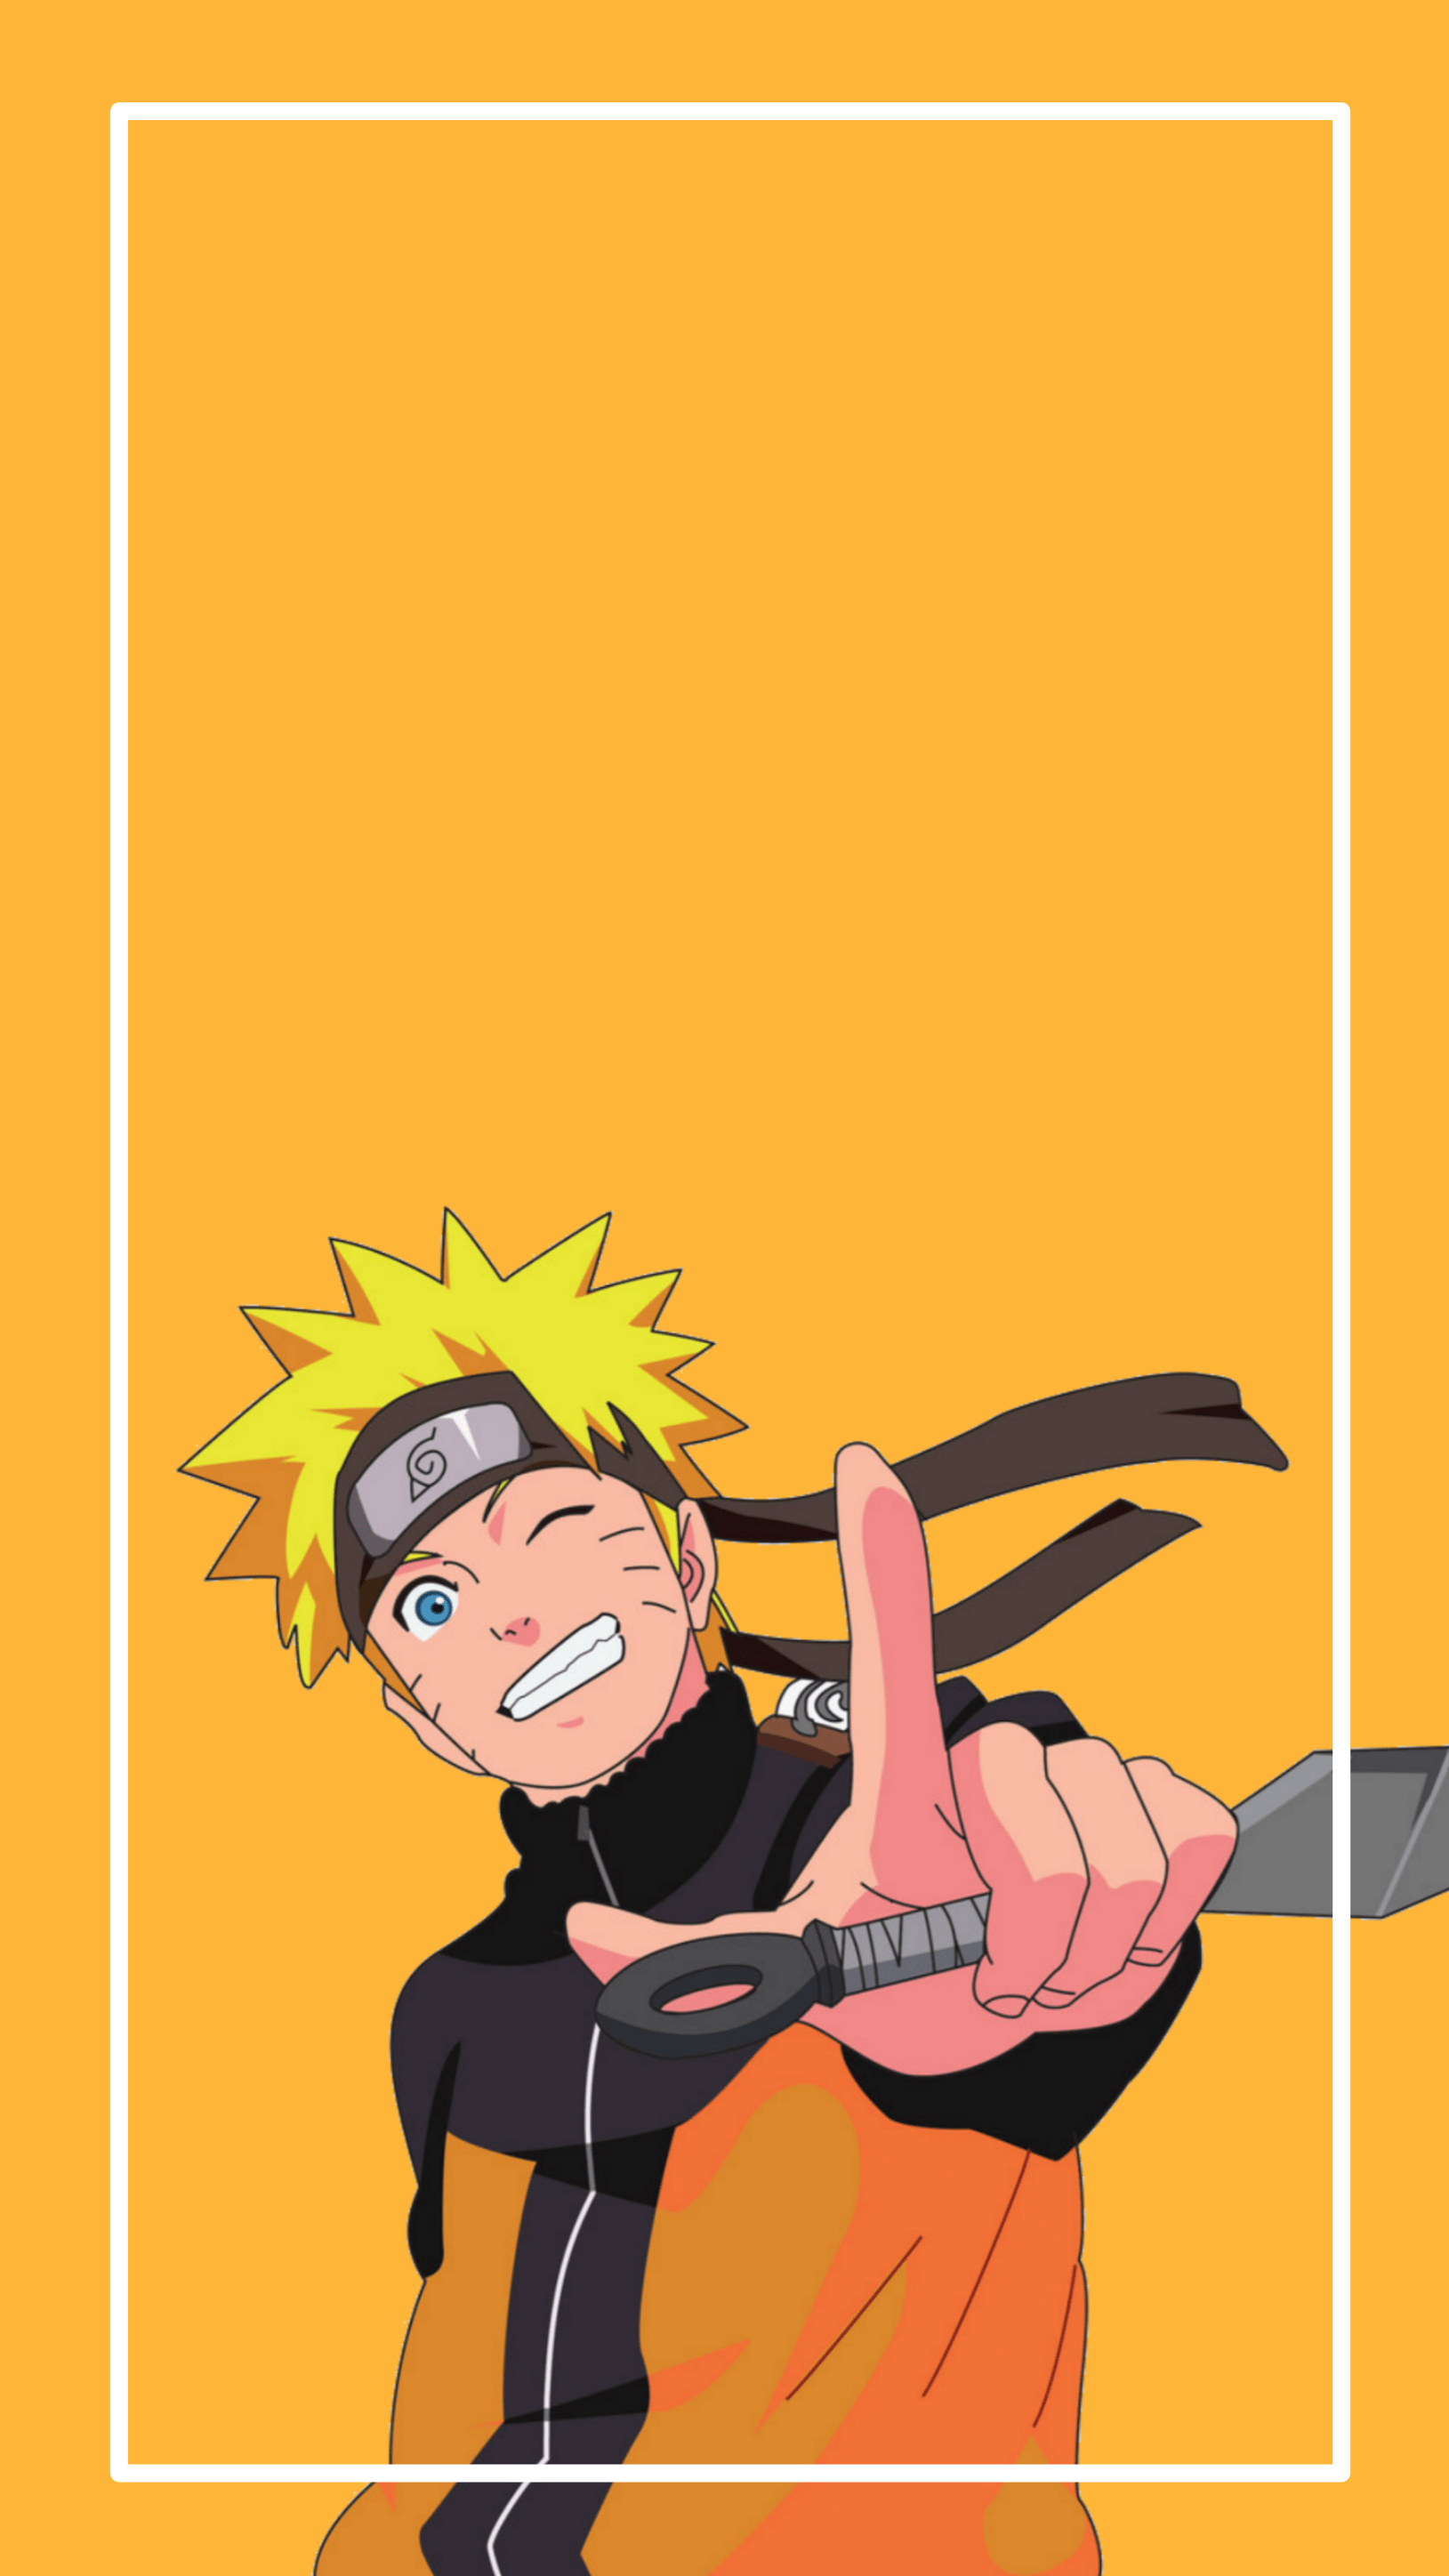 A cartoon character is holding up his hand - Naruto